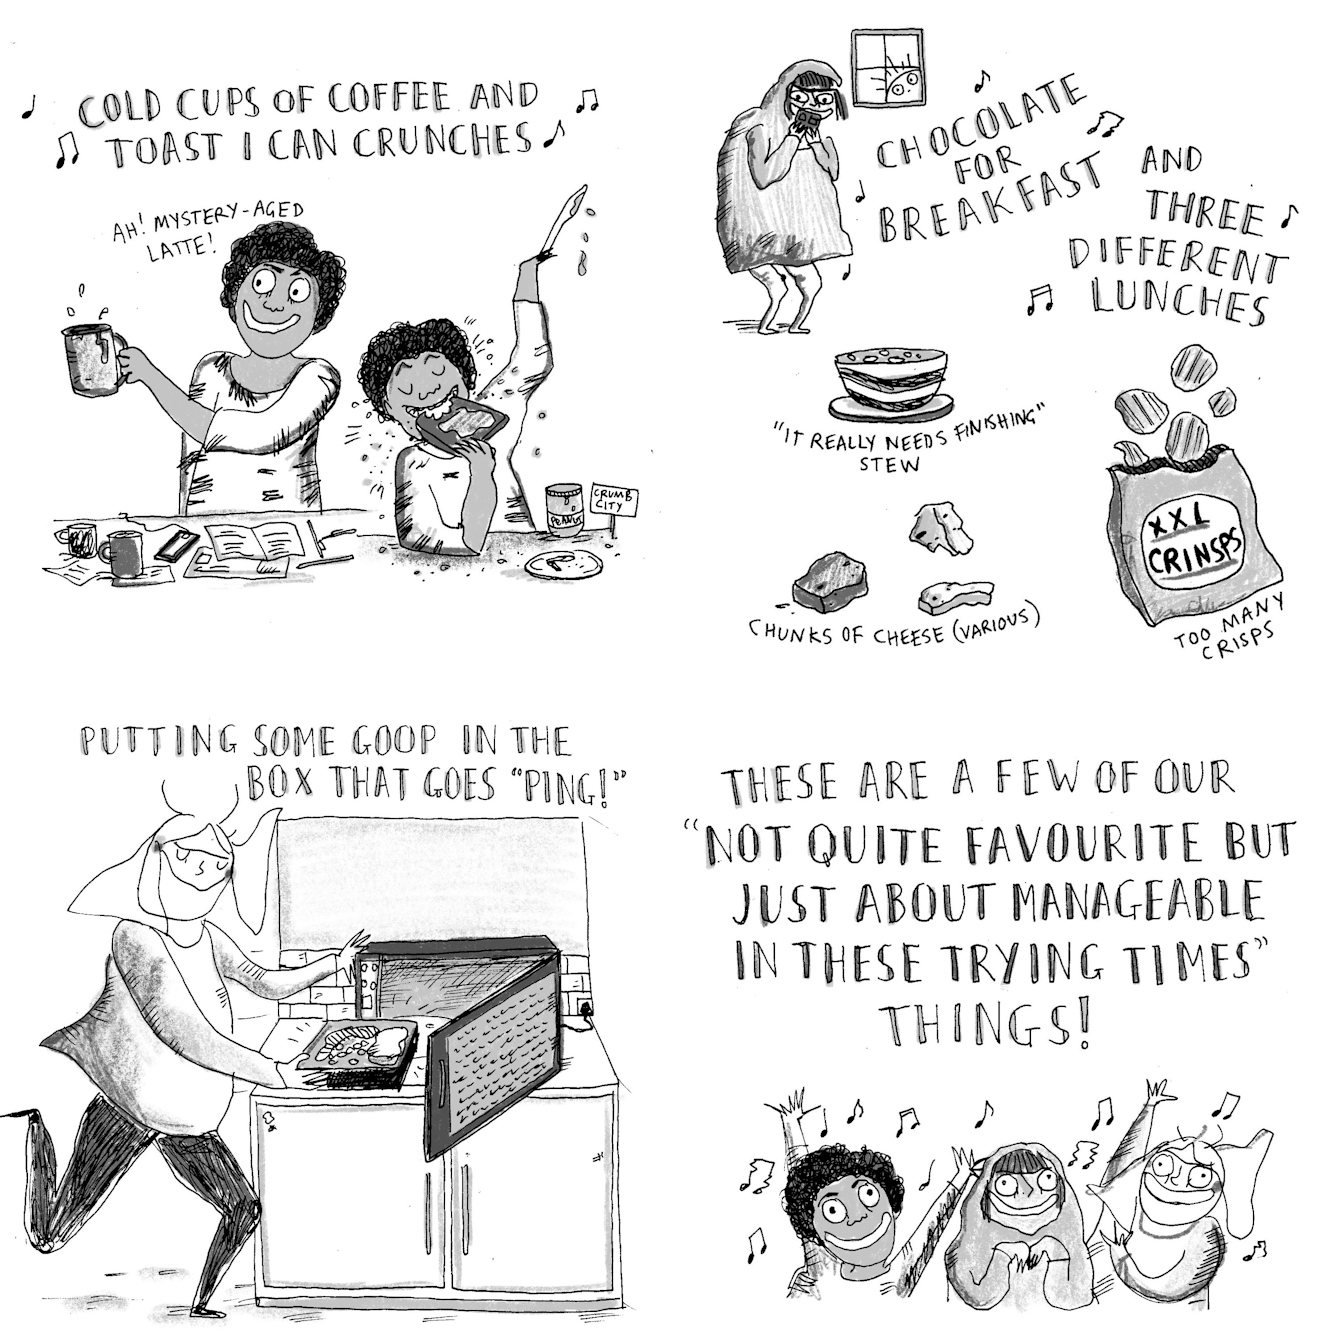 Web comic comprising four panels looking at human's favourite things